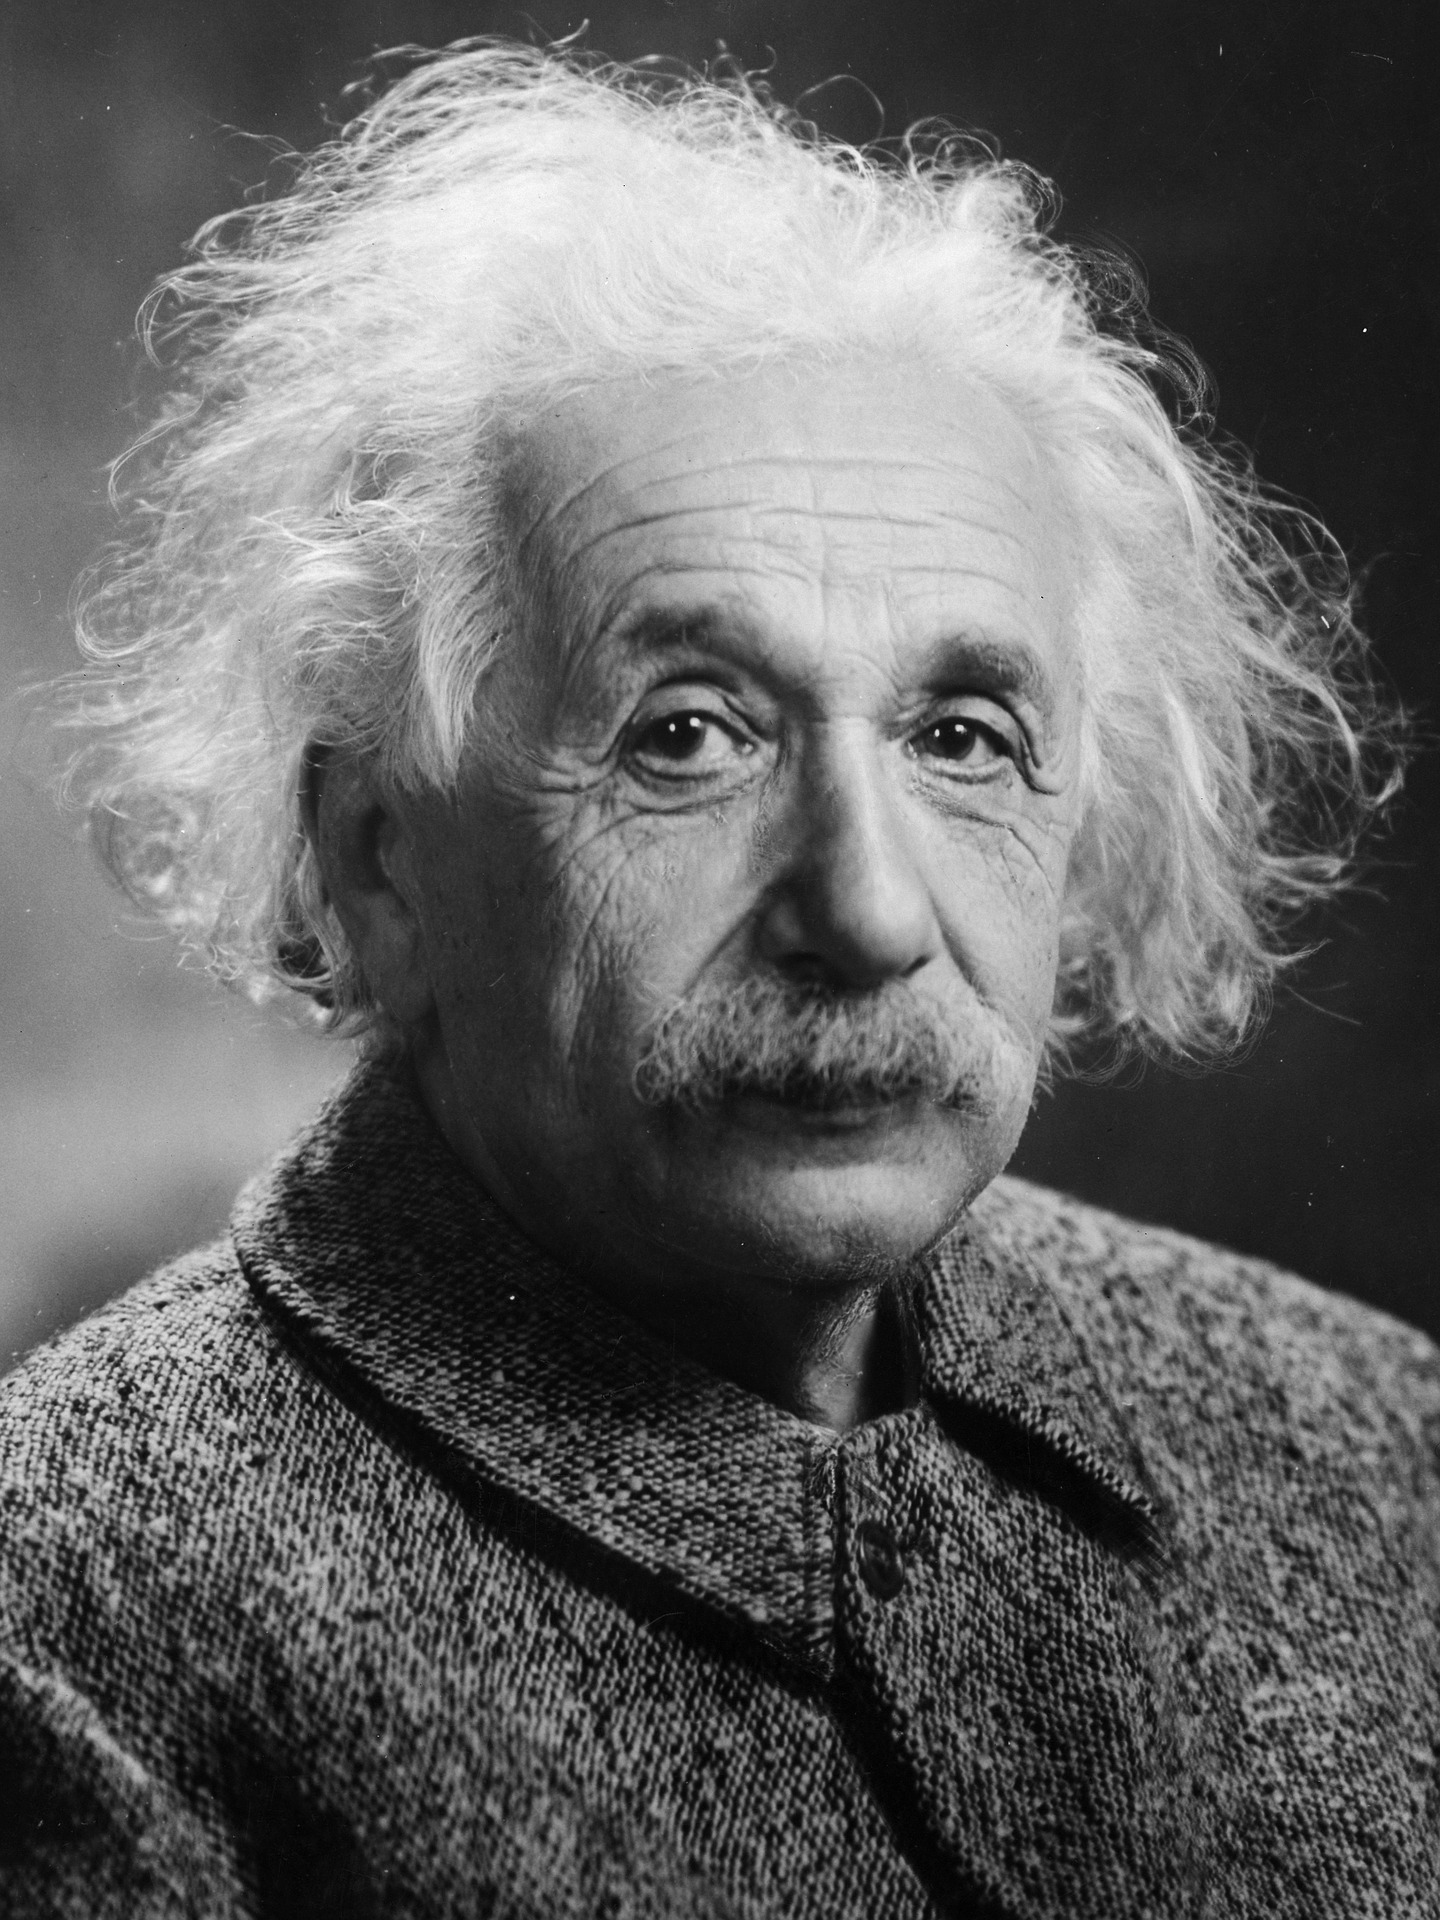 Albert Einstein used his imagination to the hilt to reach into the truths of God